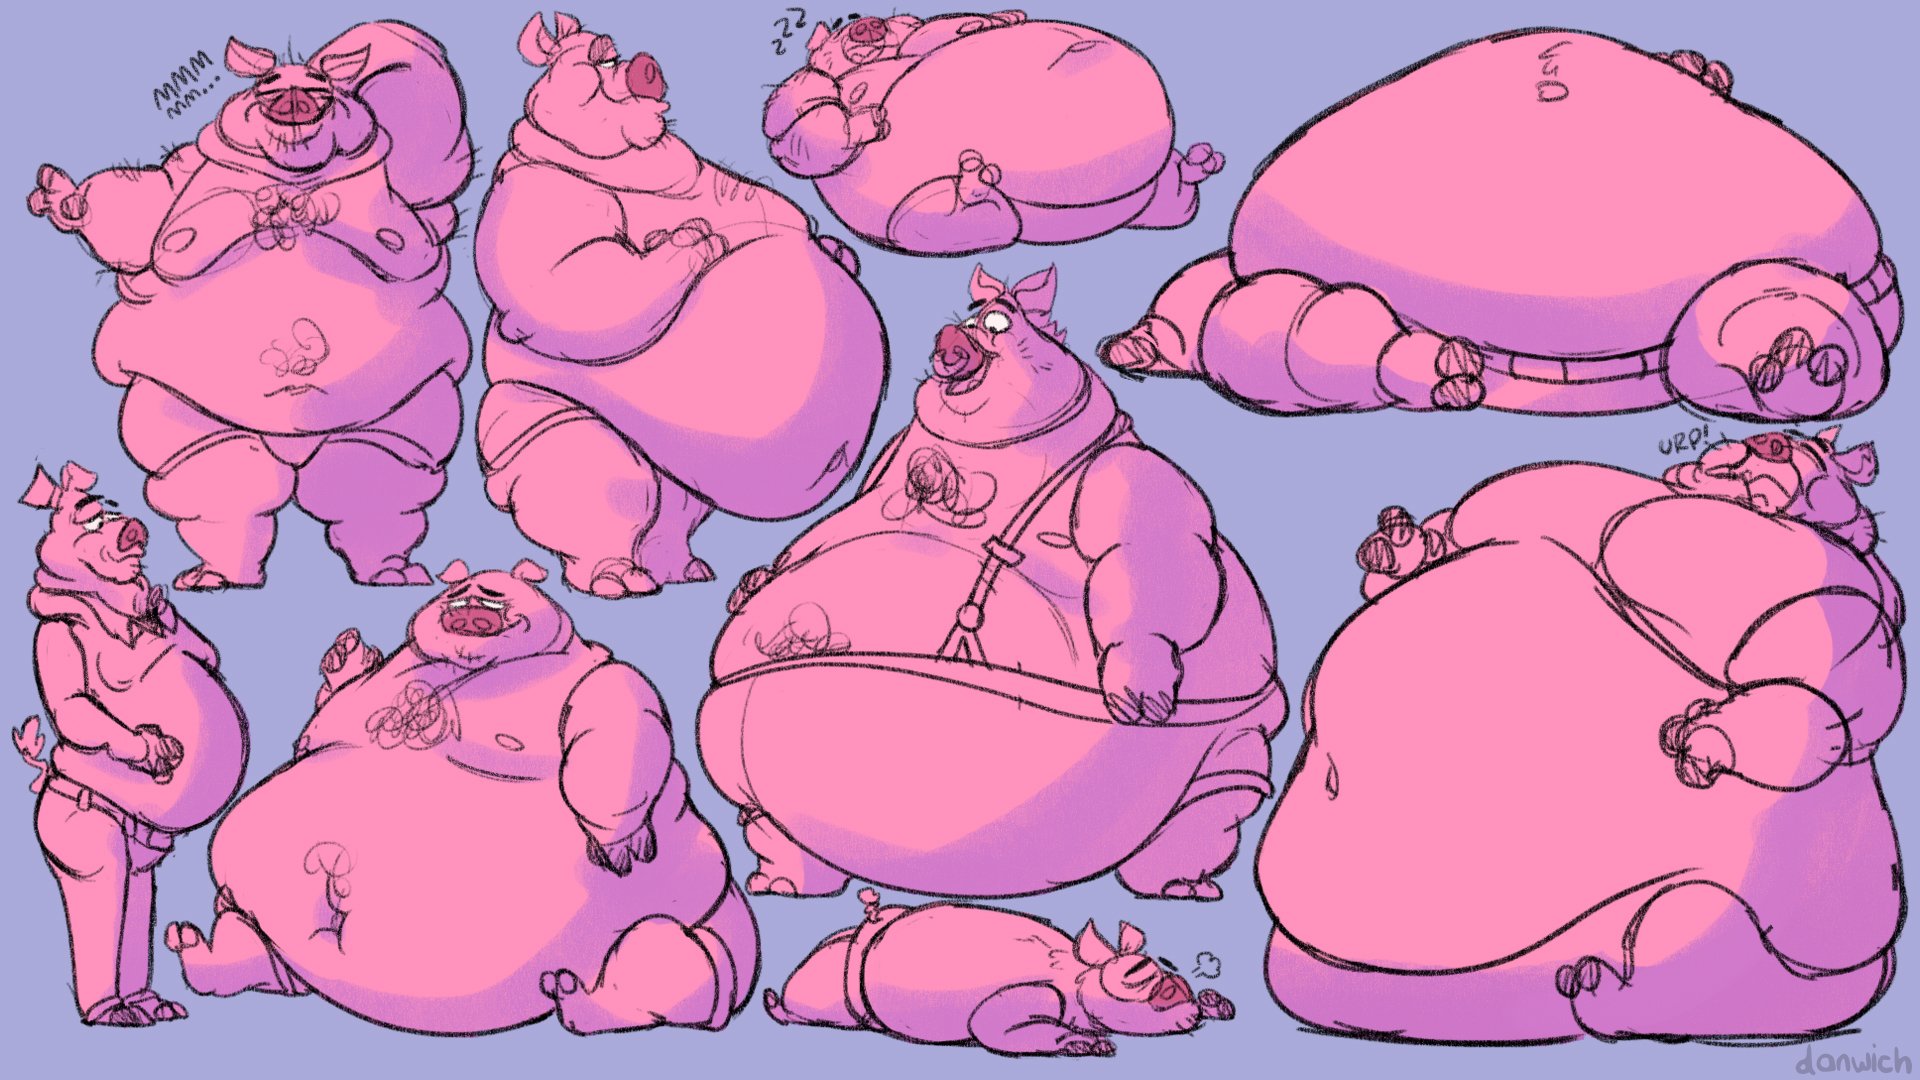 “Fat fur art is a PIG deal to me! https://t.co/lEsUtdNmMp” .